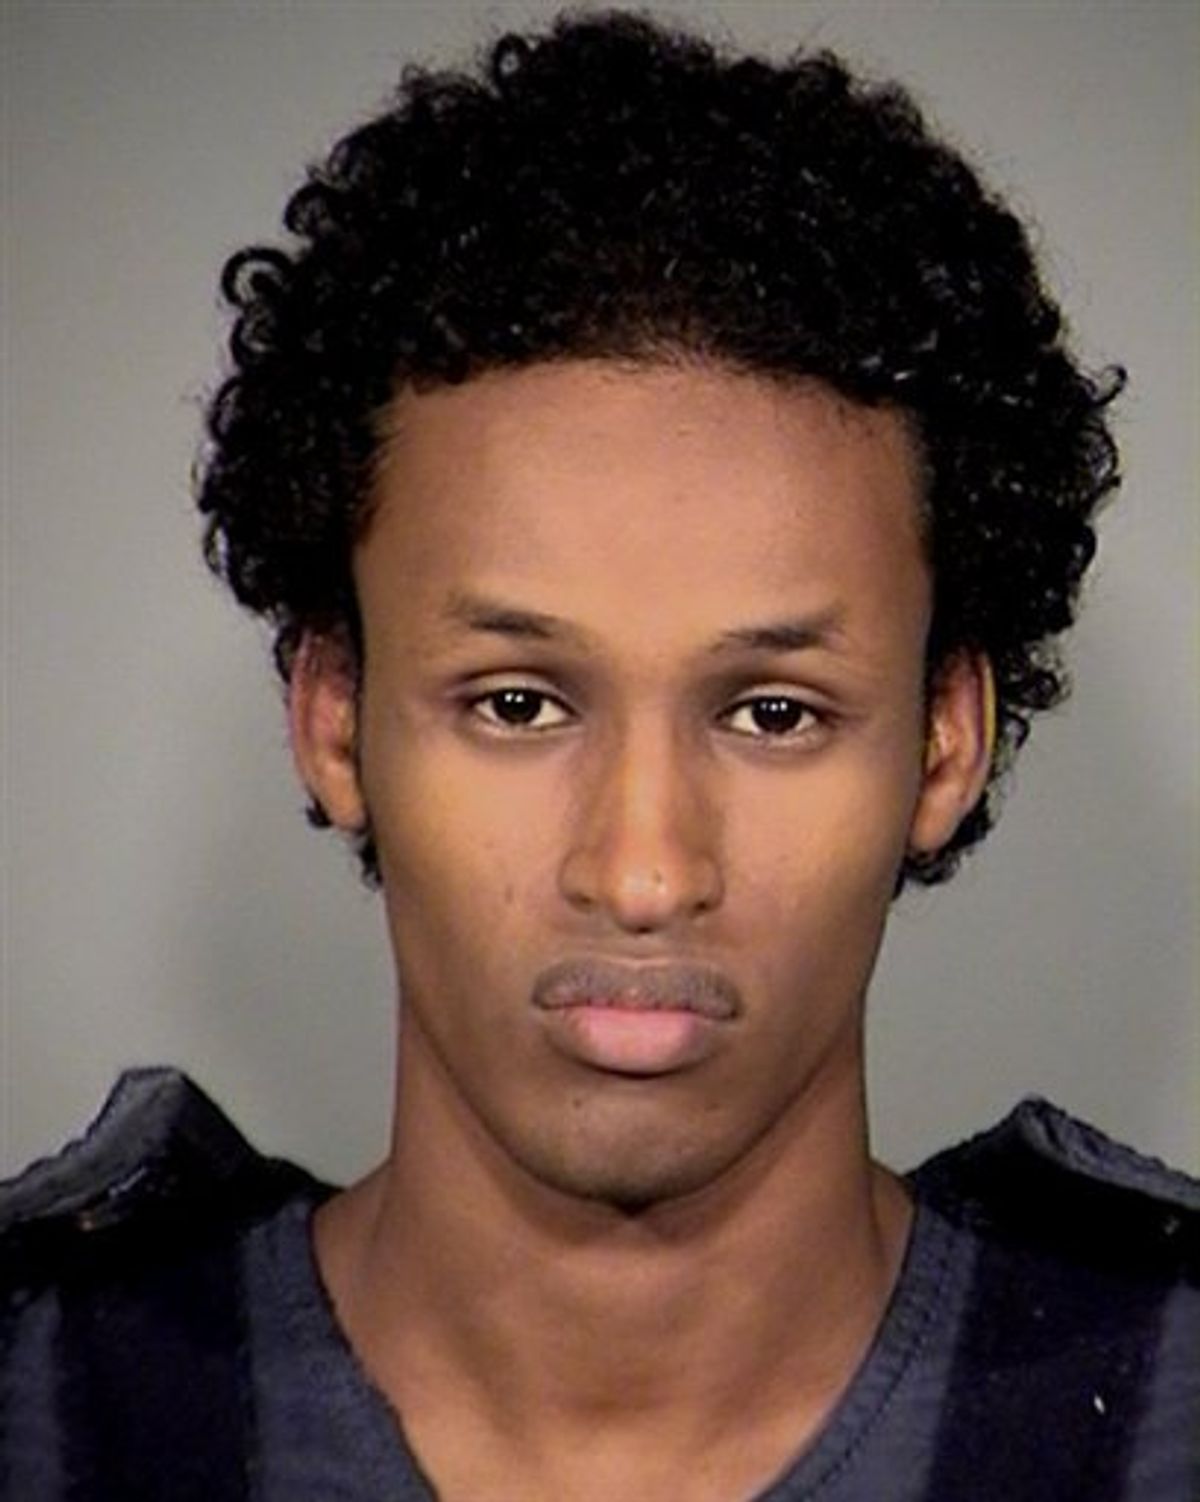 ** CORRECTS NAME OF COUNTY TO MULTNOMAH INSTEAD OF MAUTHNOMAH ** This image released Nov. 27, 2010 by the Multnomah County Sheriff's Office shows Mohamed Osman Mohamud, 19. Federal agents in a sting operation arrested the Somali-born teenager just as he tried blowing up a van full of what he believed were explosives at a crowded Christmas tree lighting ceremony, federal authorities said. The bomb was a fake supplied by the agents and the public was never in danger, authorities said. (AP Photo/Multnomah County Sheriff's Office)  (AP)